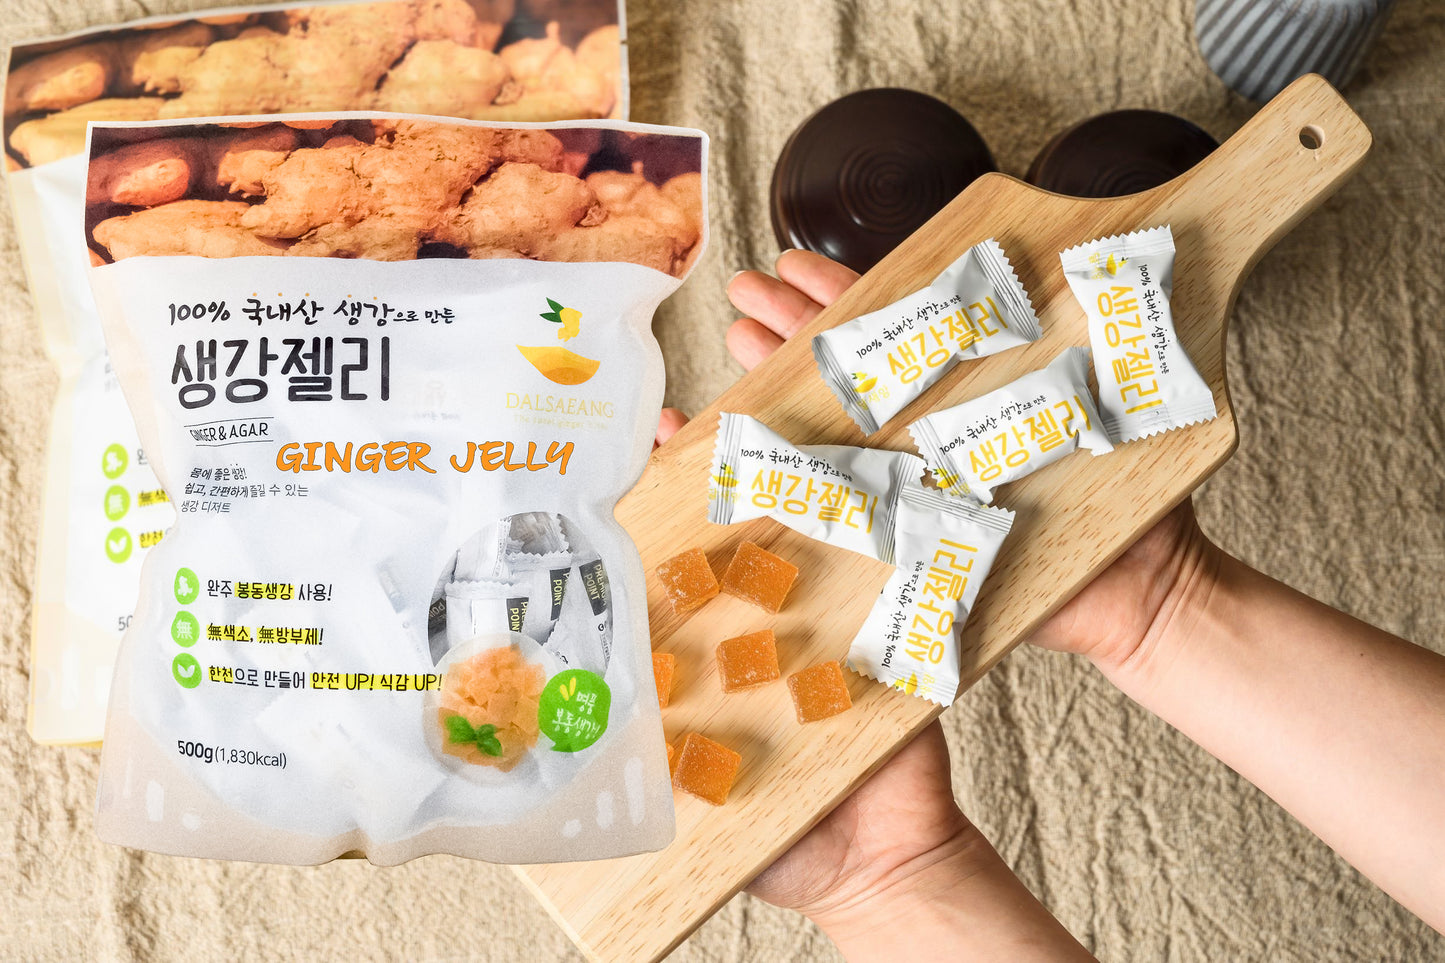 Dalseang Ginger Jelly, 달새앙 생강젤리, 500g, 2 Packs, No Preservatives, No Trans Fat